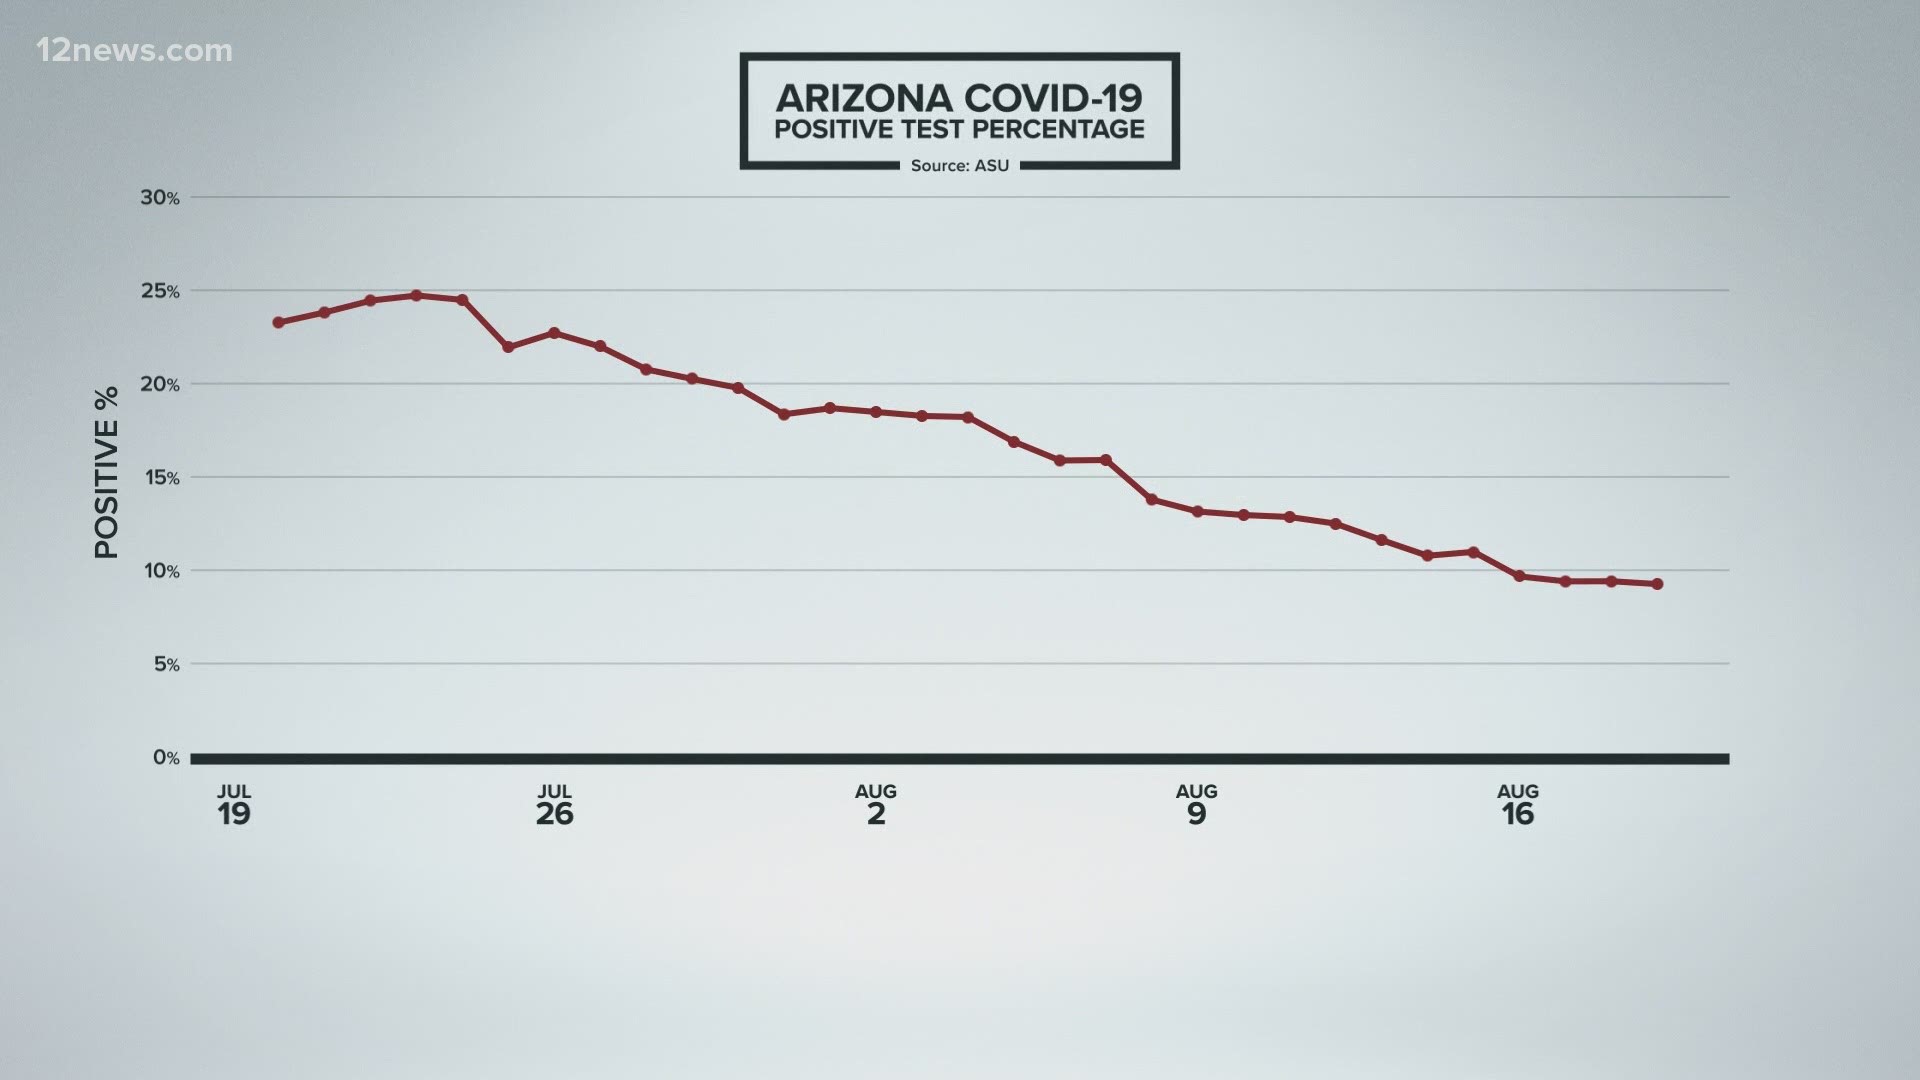 In July there were more than 2,300 cases of COVID-19 reported in Arizona. Today, we were below 700 reported cases. Experts say these are the best numbers in months.